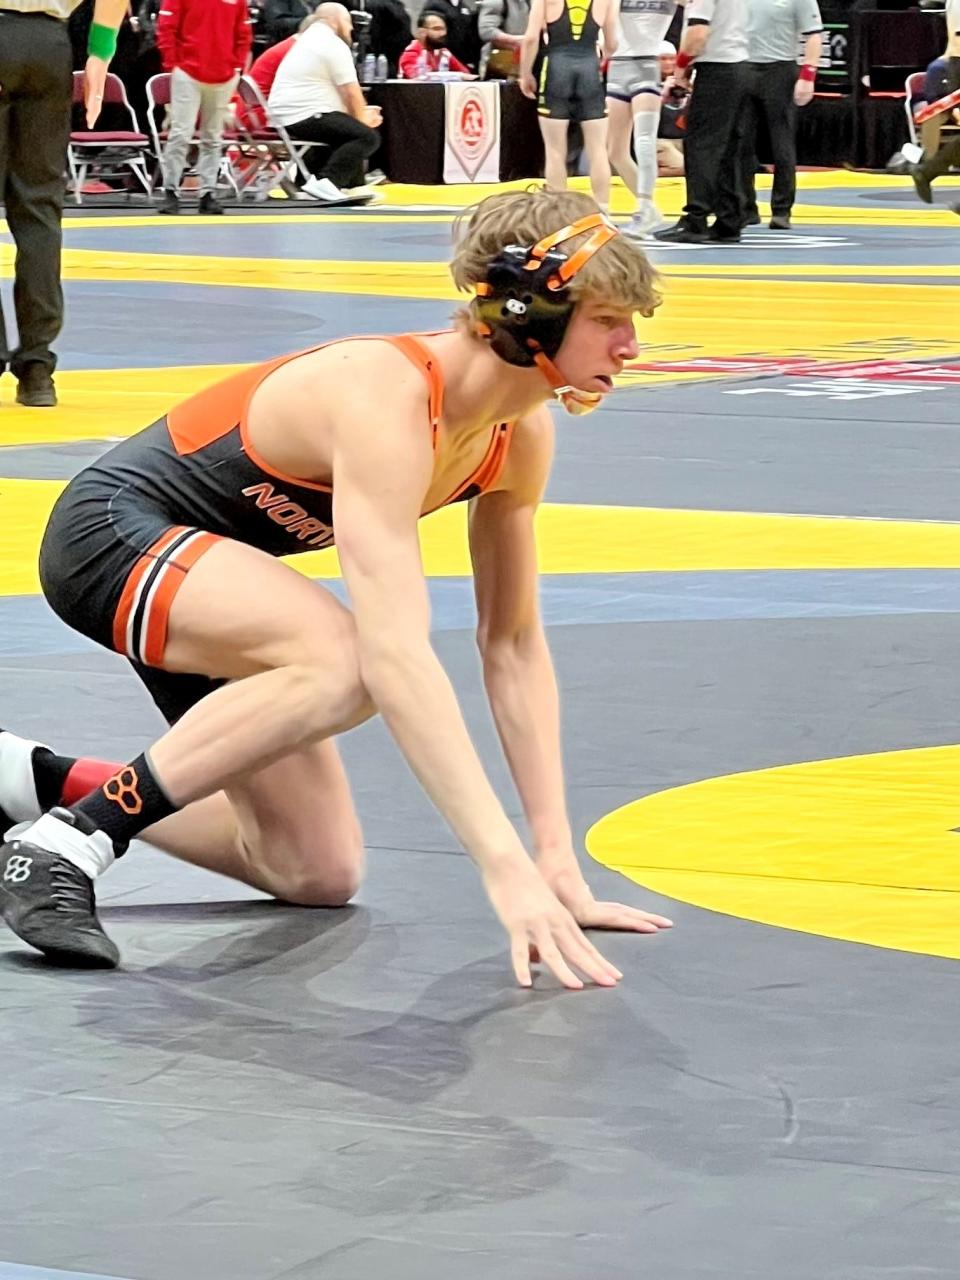 North Union's Trace Williams competes in a Division II 120-pound match Sunday at the state wrestling tournament at Ohio State's Schottenstein Center.